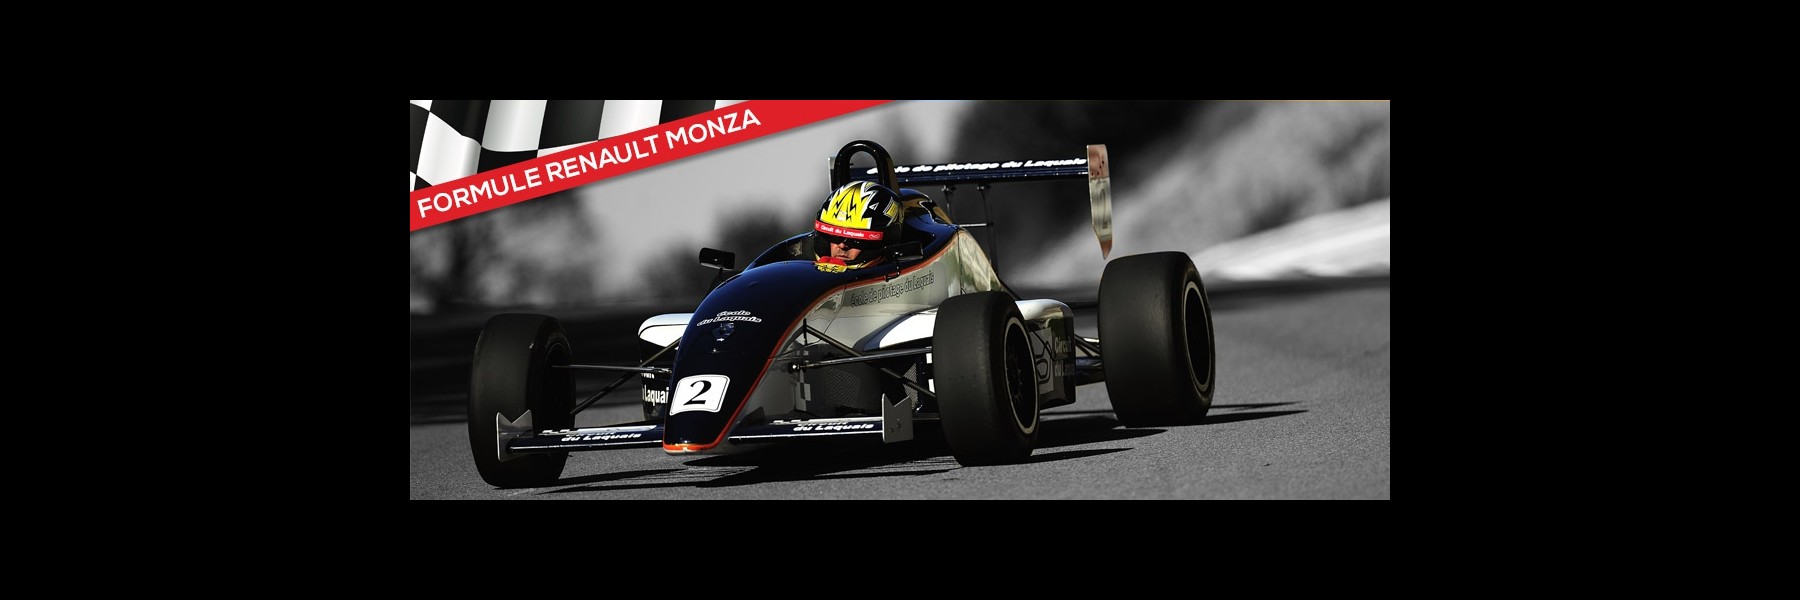 Driving experience Formule Renault Monza